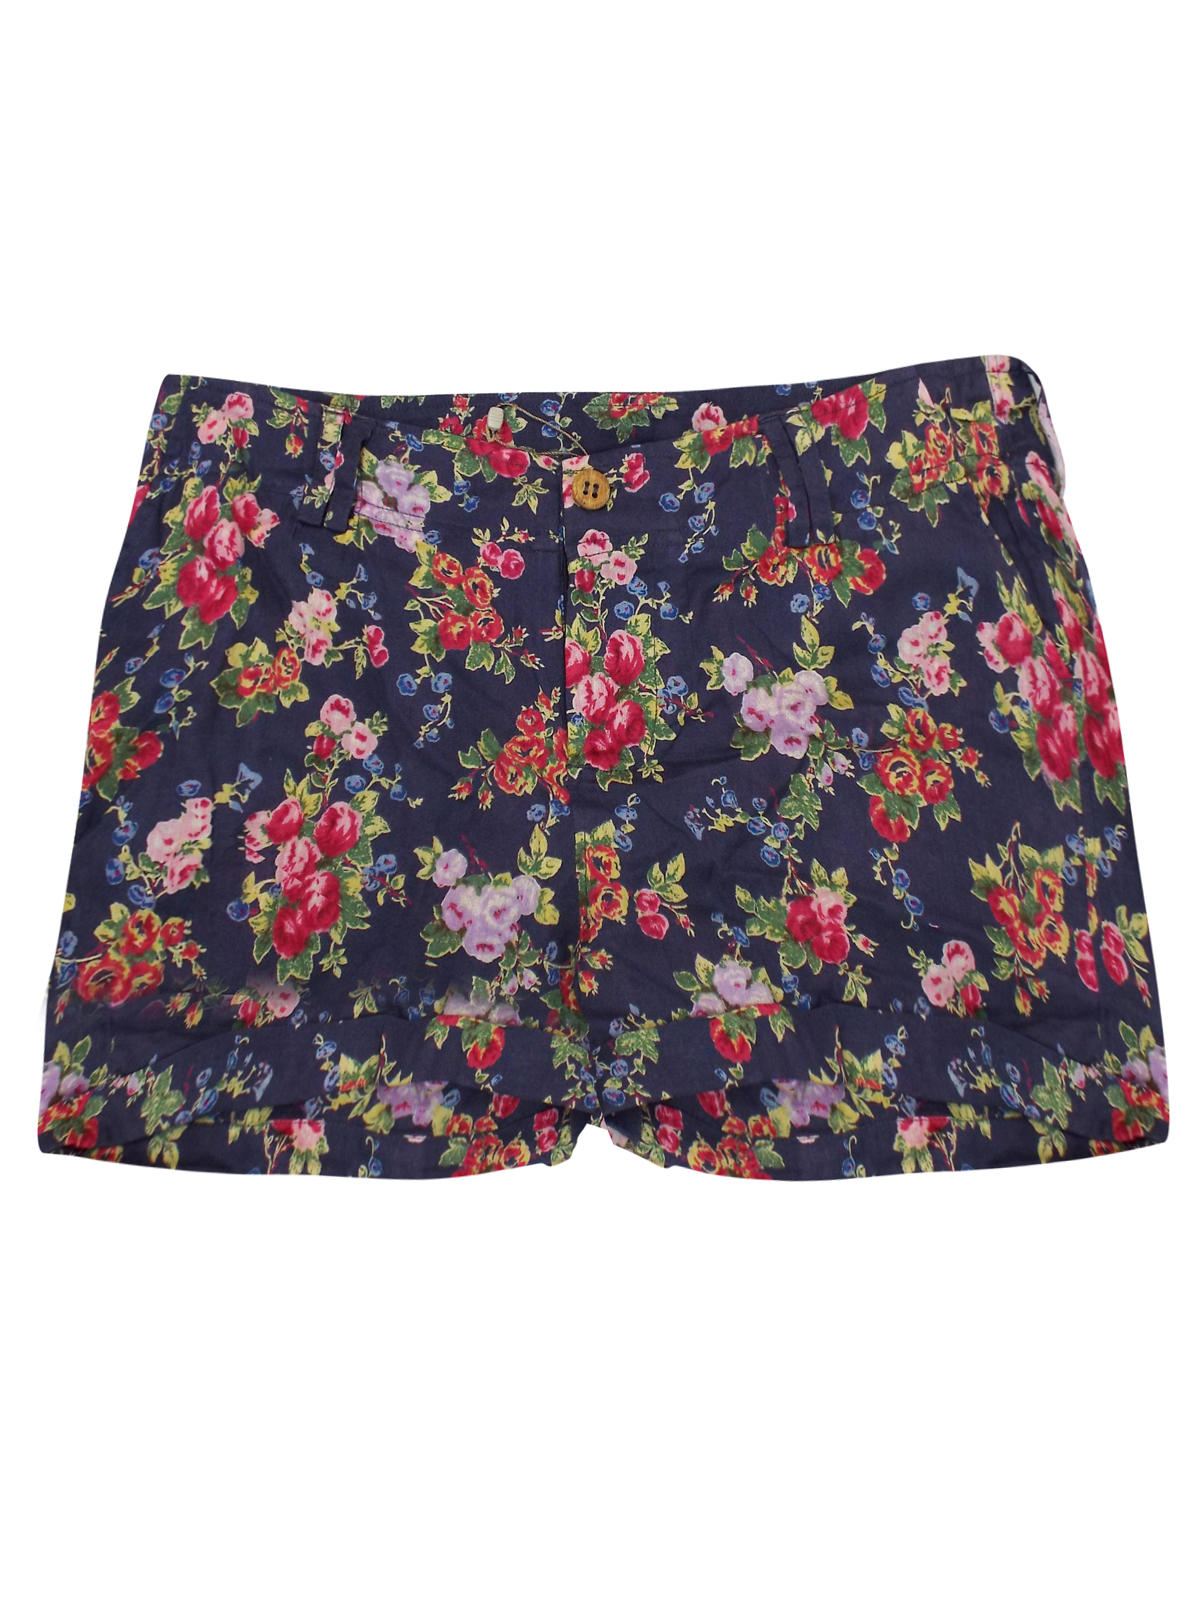 M0nsoon ASSORTED Ladies Skirts & Shorts - Size XSmall to Large